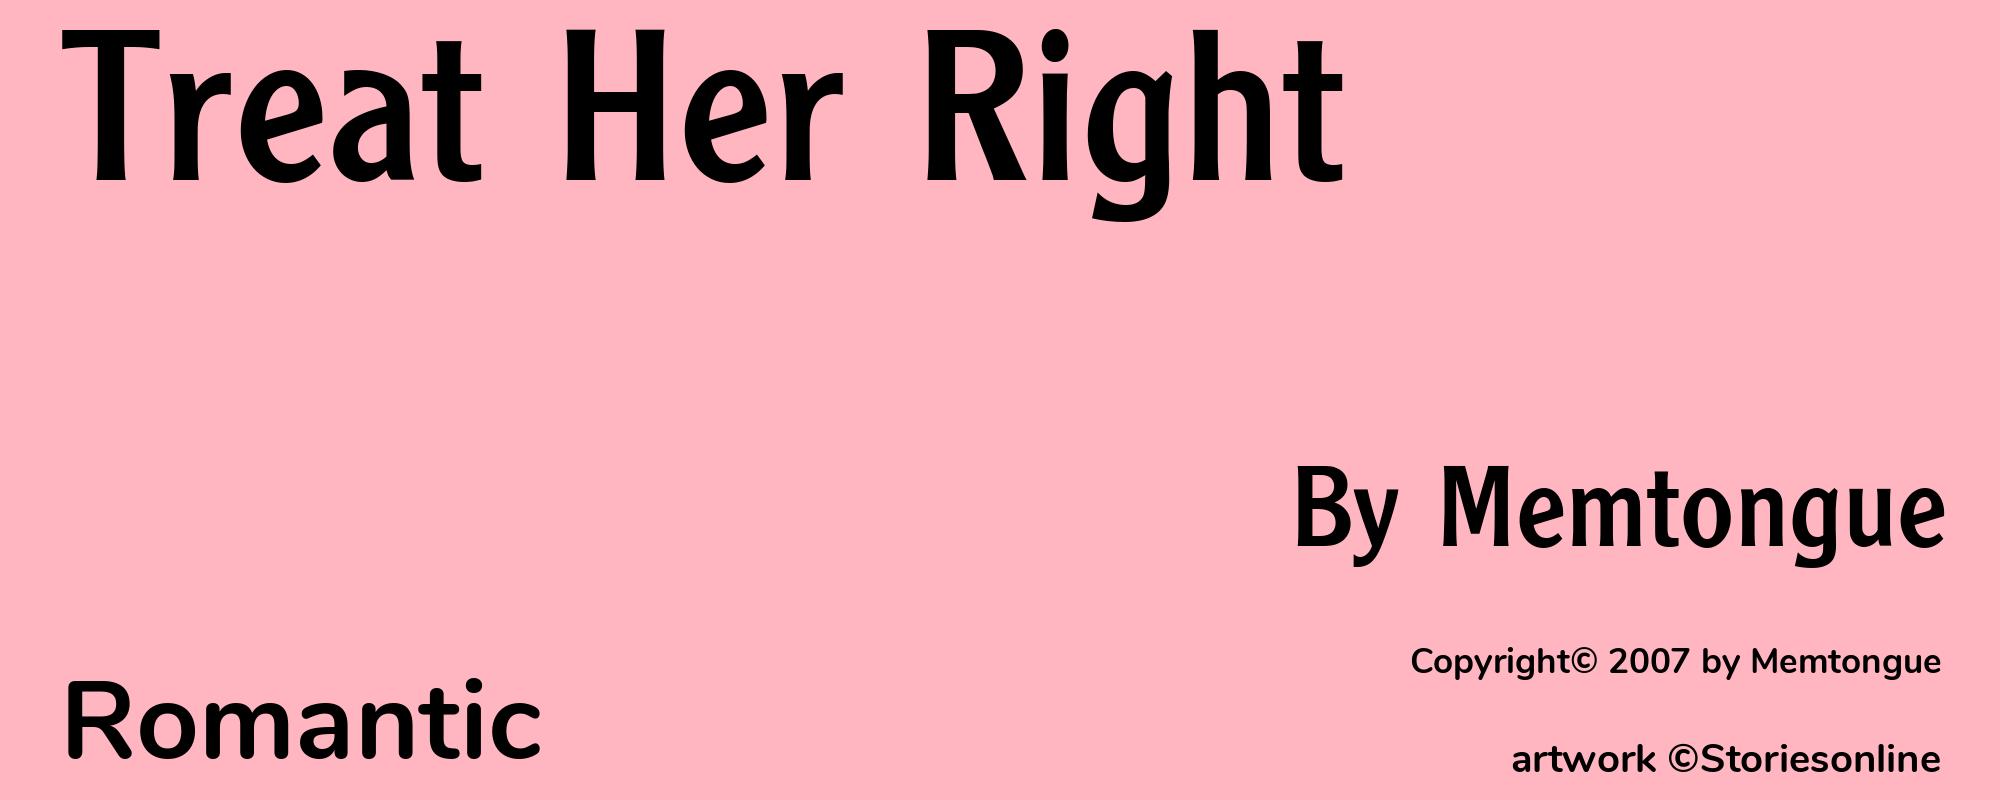 Treat Her Right - Cover